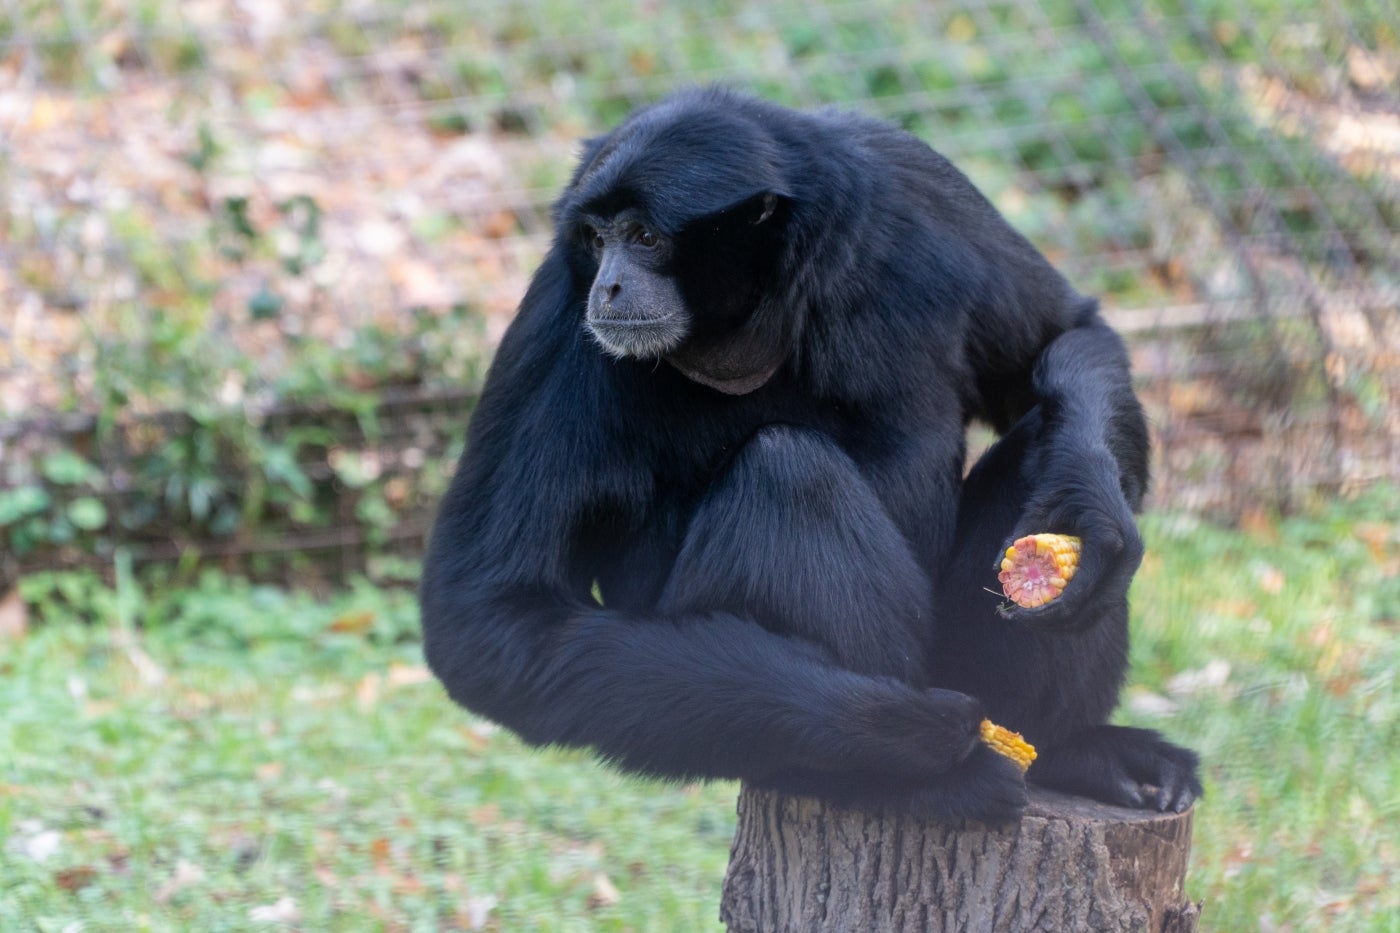 A siamang (gibbon) with black fur and long arms sits on a tree stump, holding pieces of corn to eat